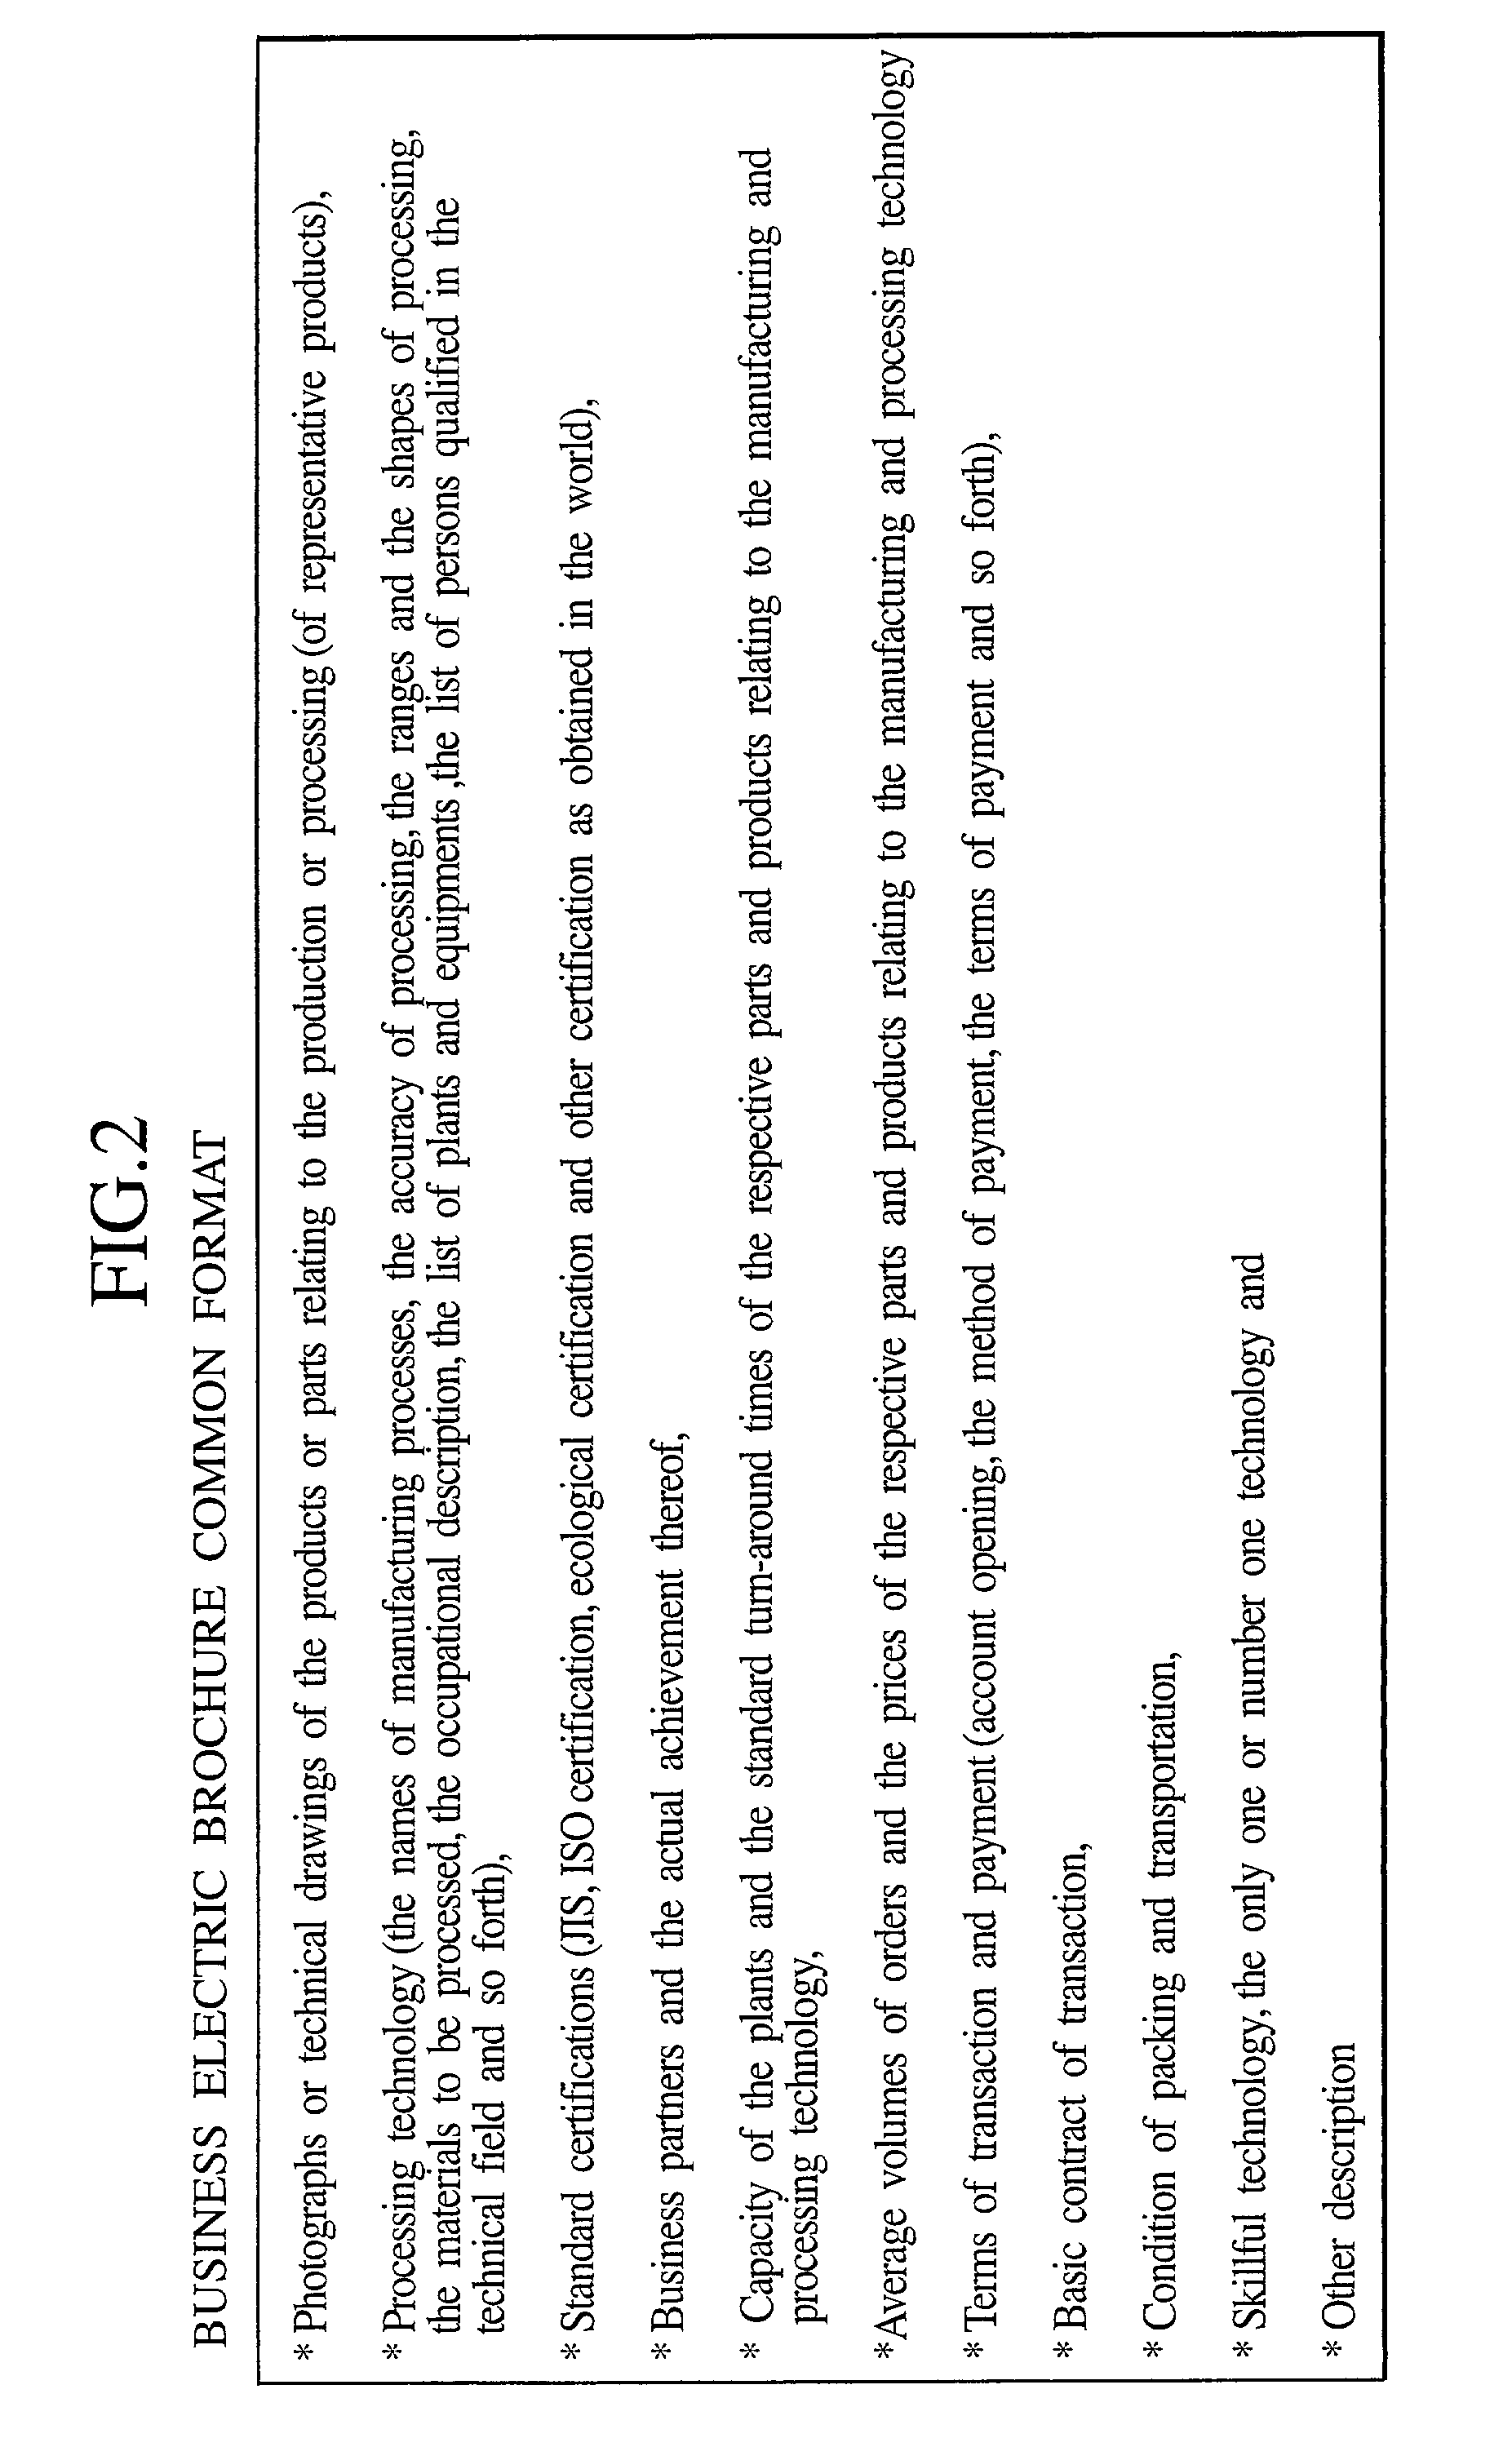 Multi-dimensional order making and receiving business matching system